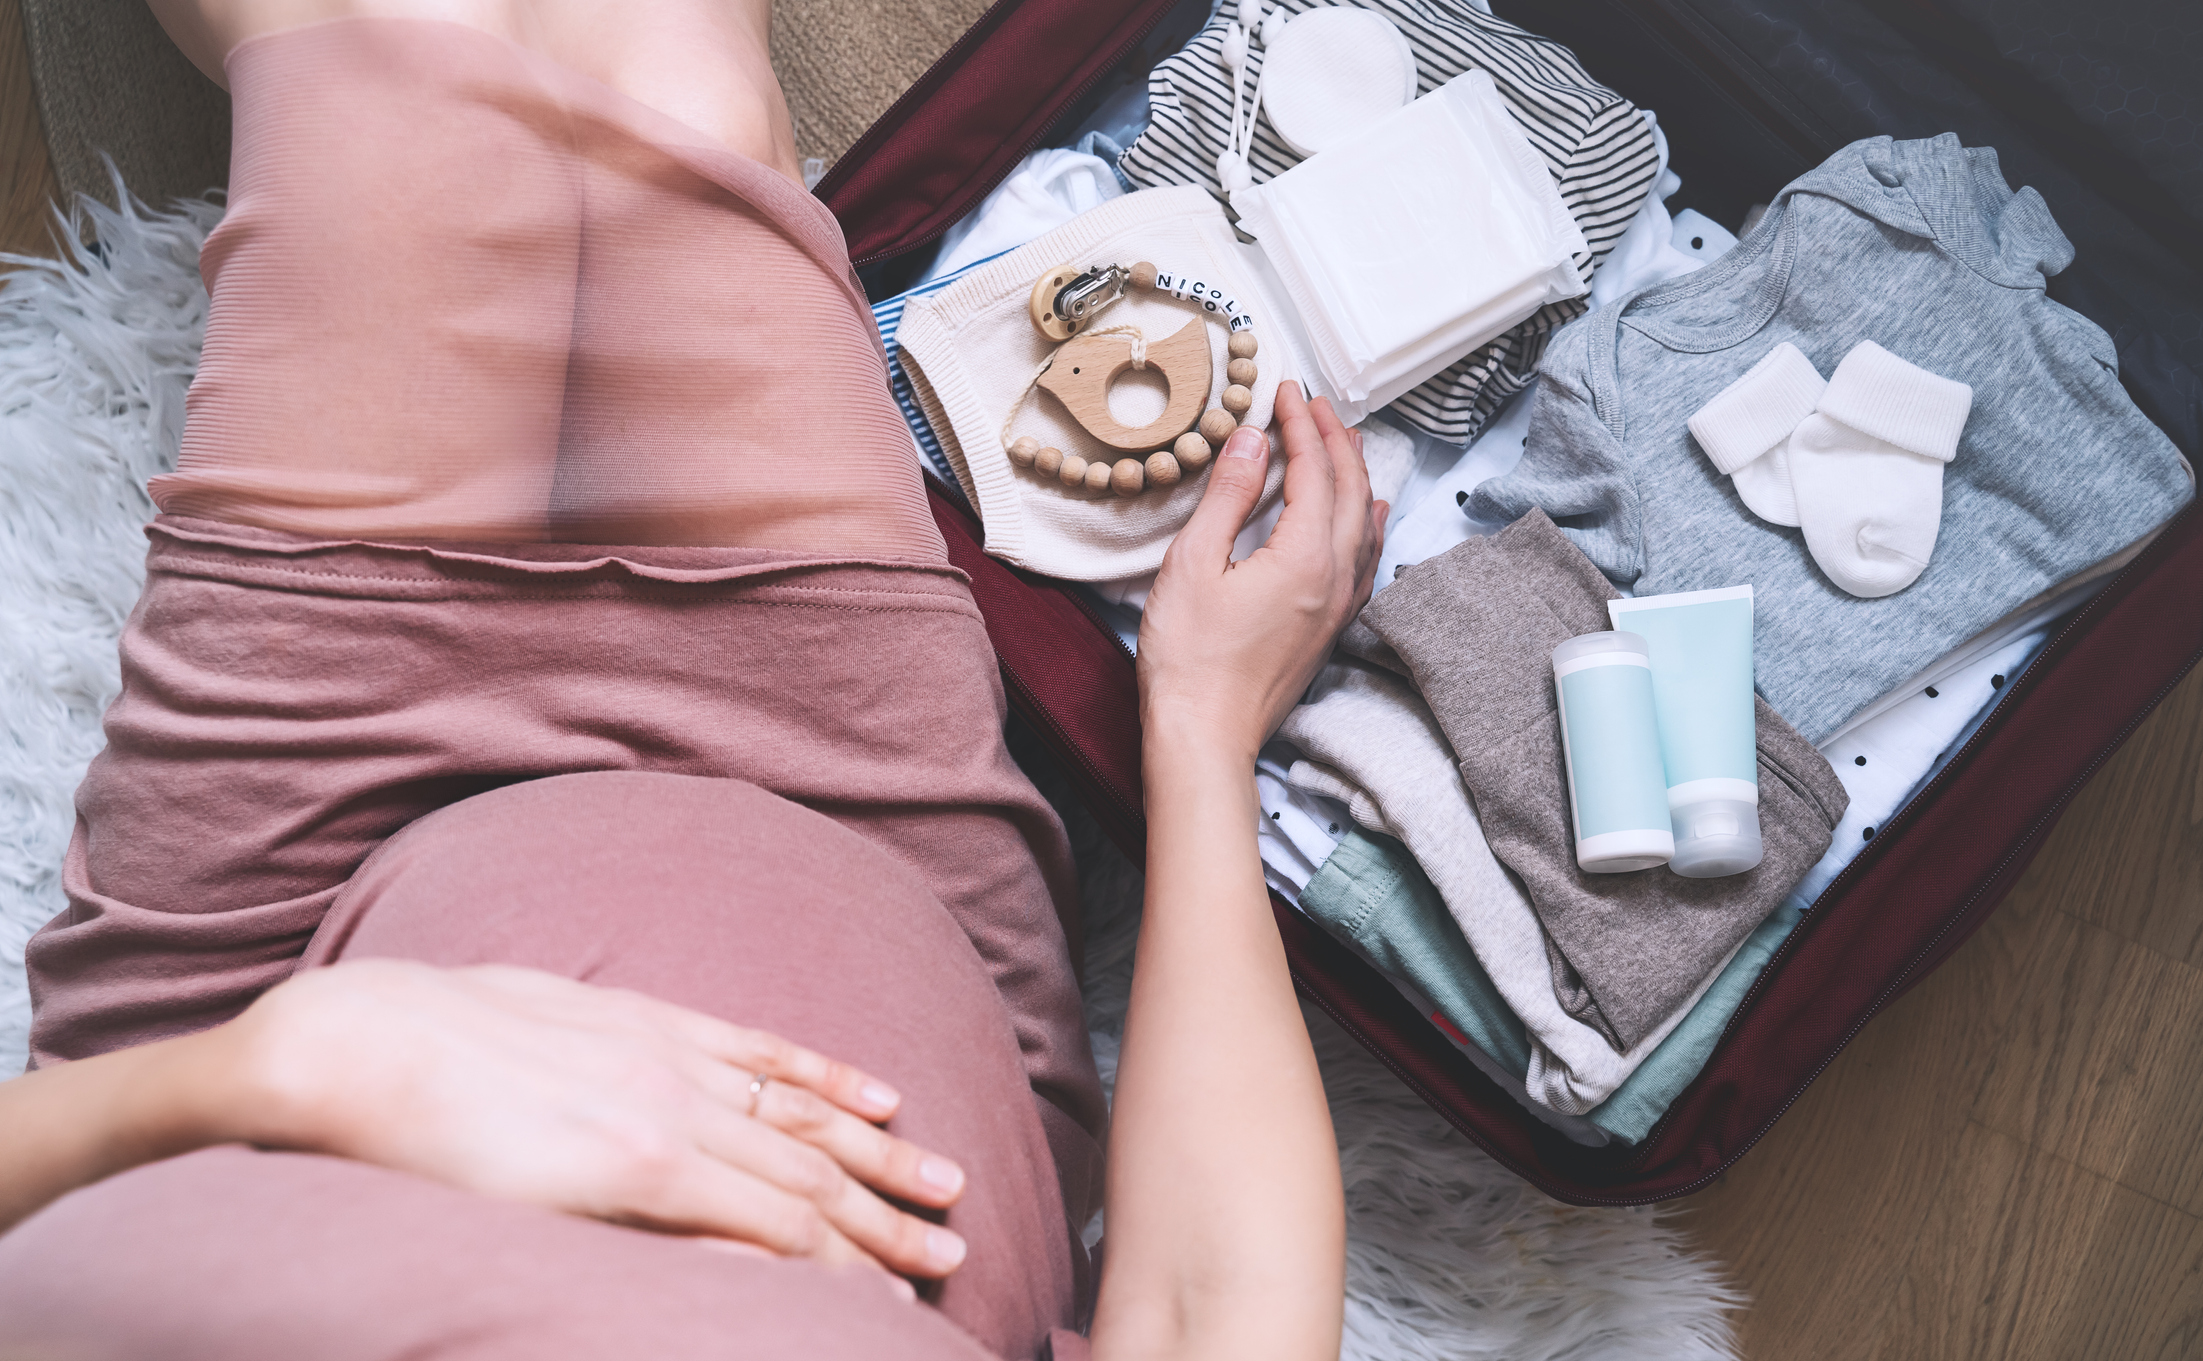 Pregnant woman hugging belly and packing maternity hospital bag